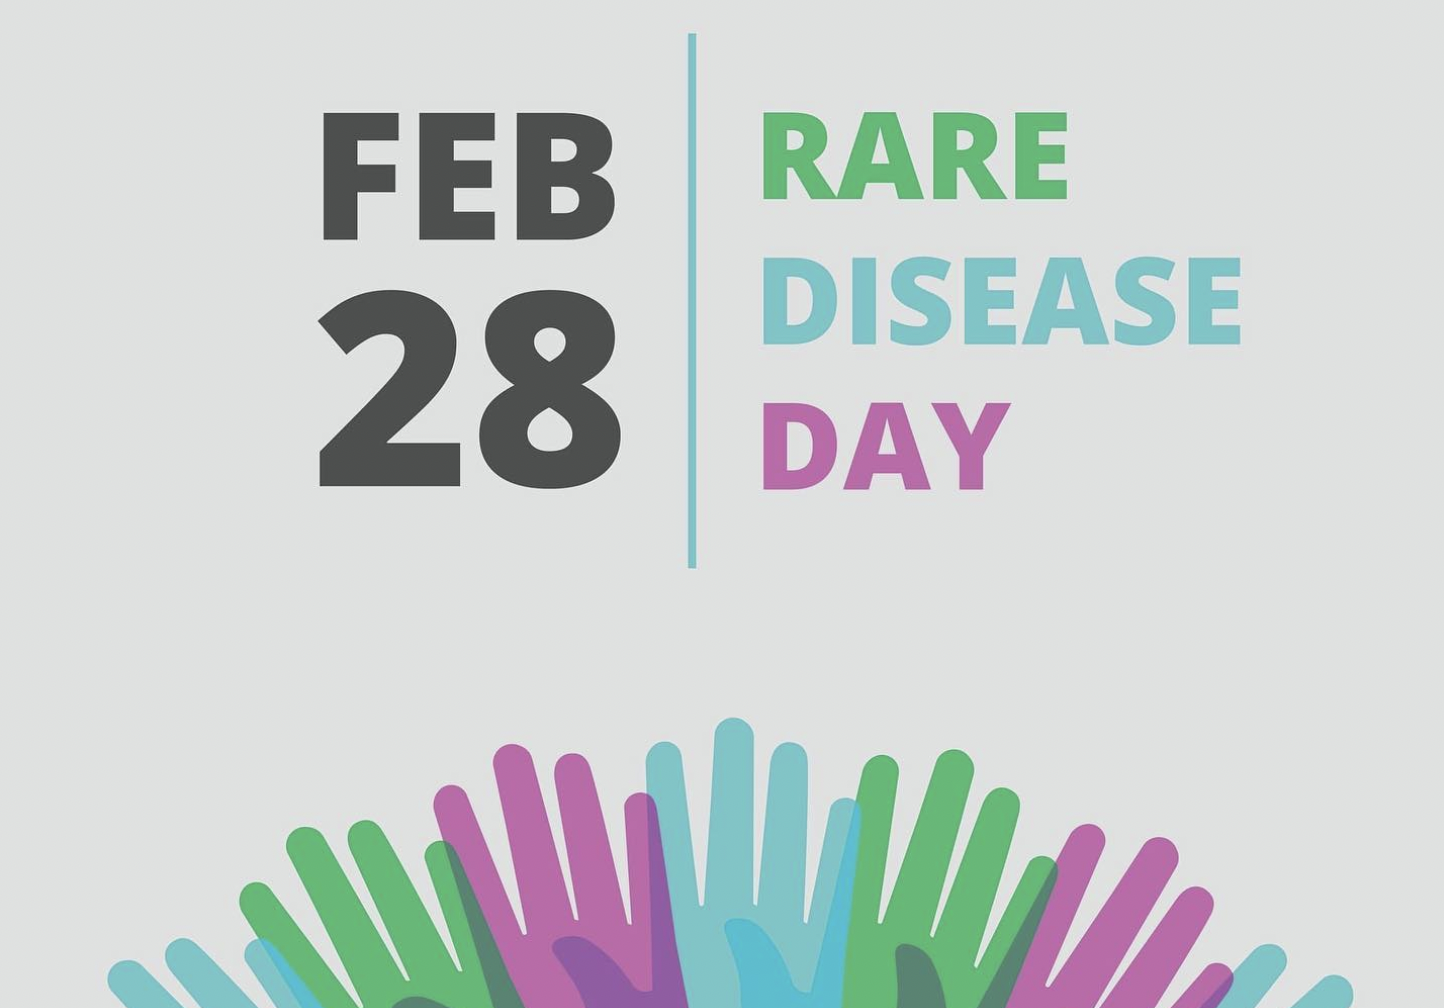 Lucy’s syndrome is a “rare disease”